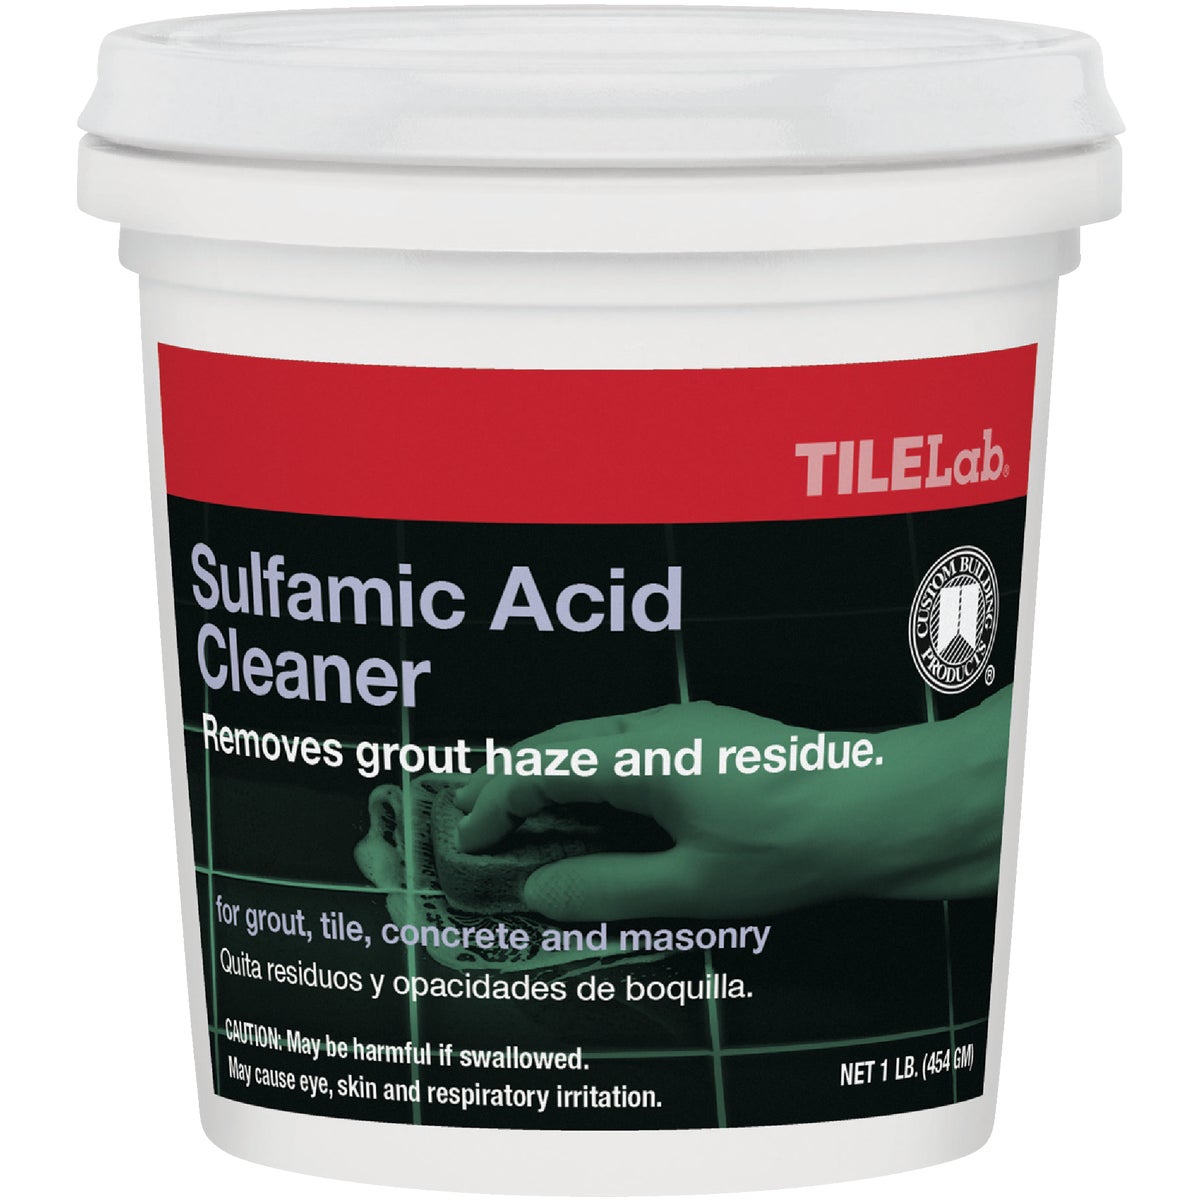 Item 272859, TileLab concentrated crystals mix with water to make a mild, safe to use, 